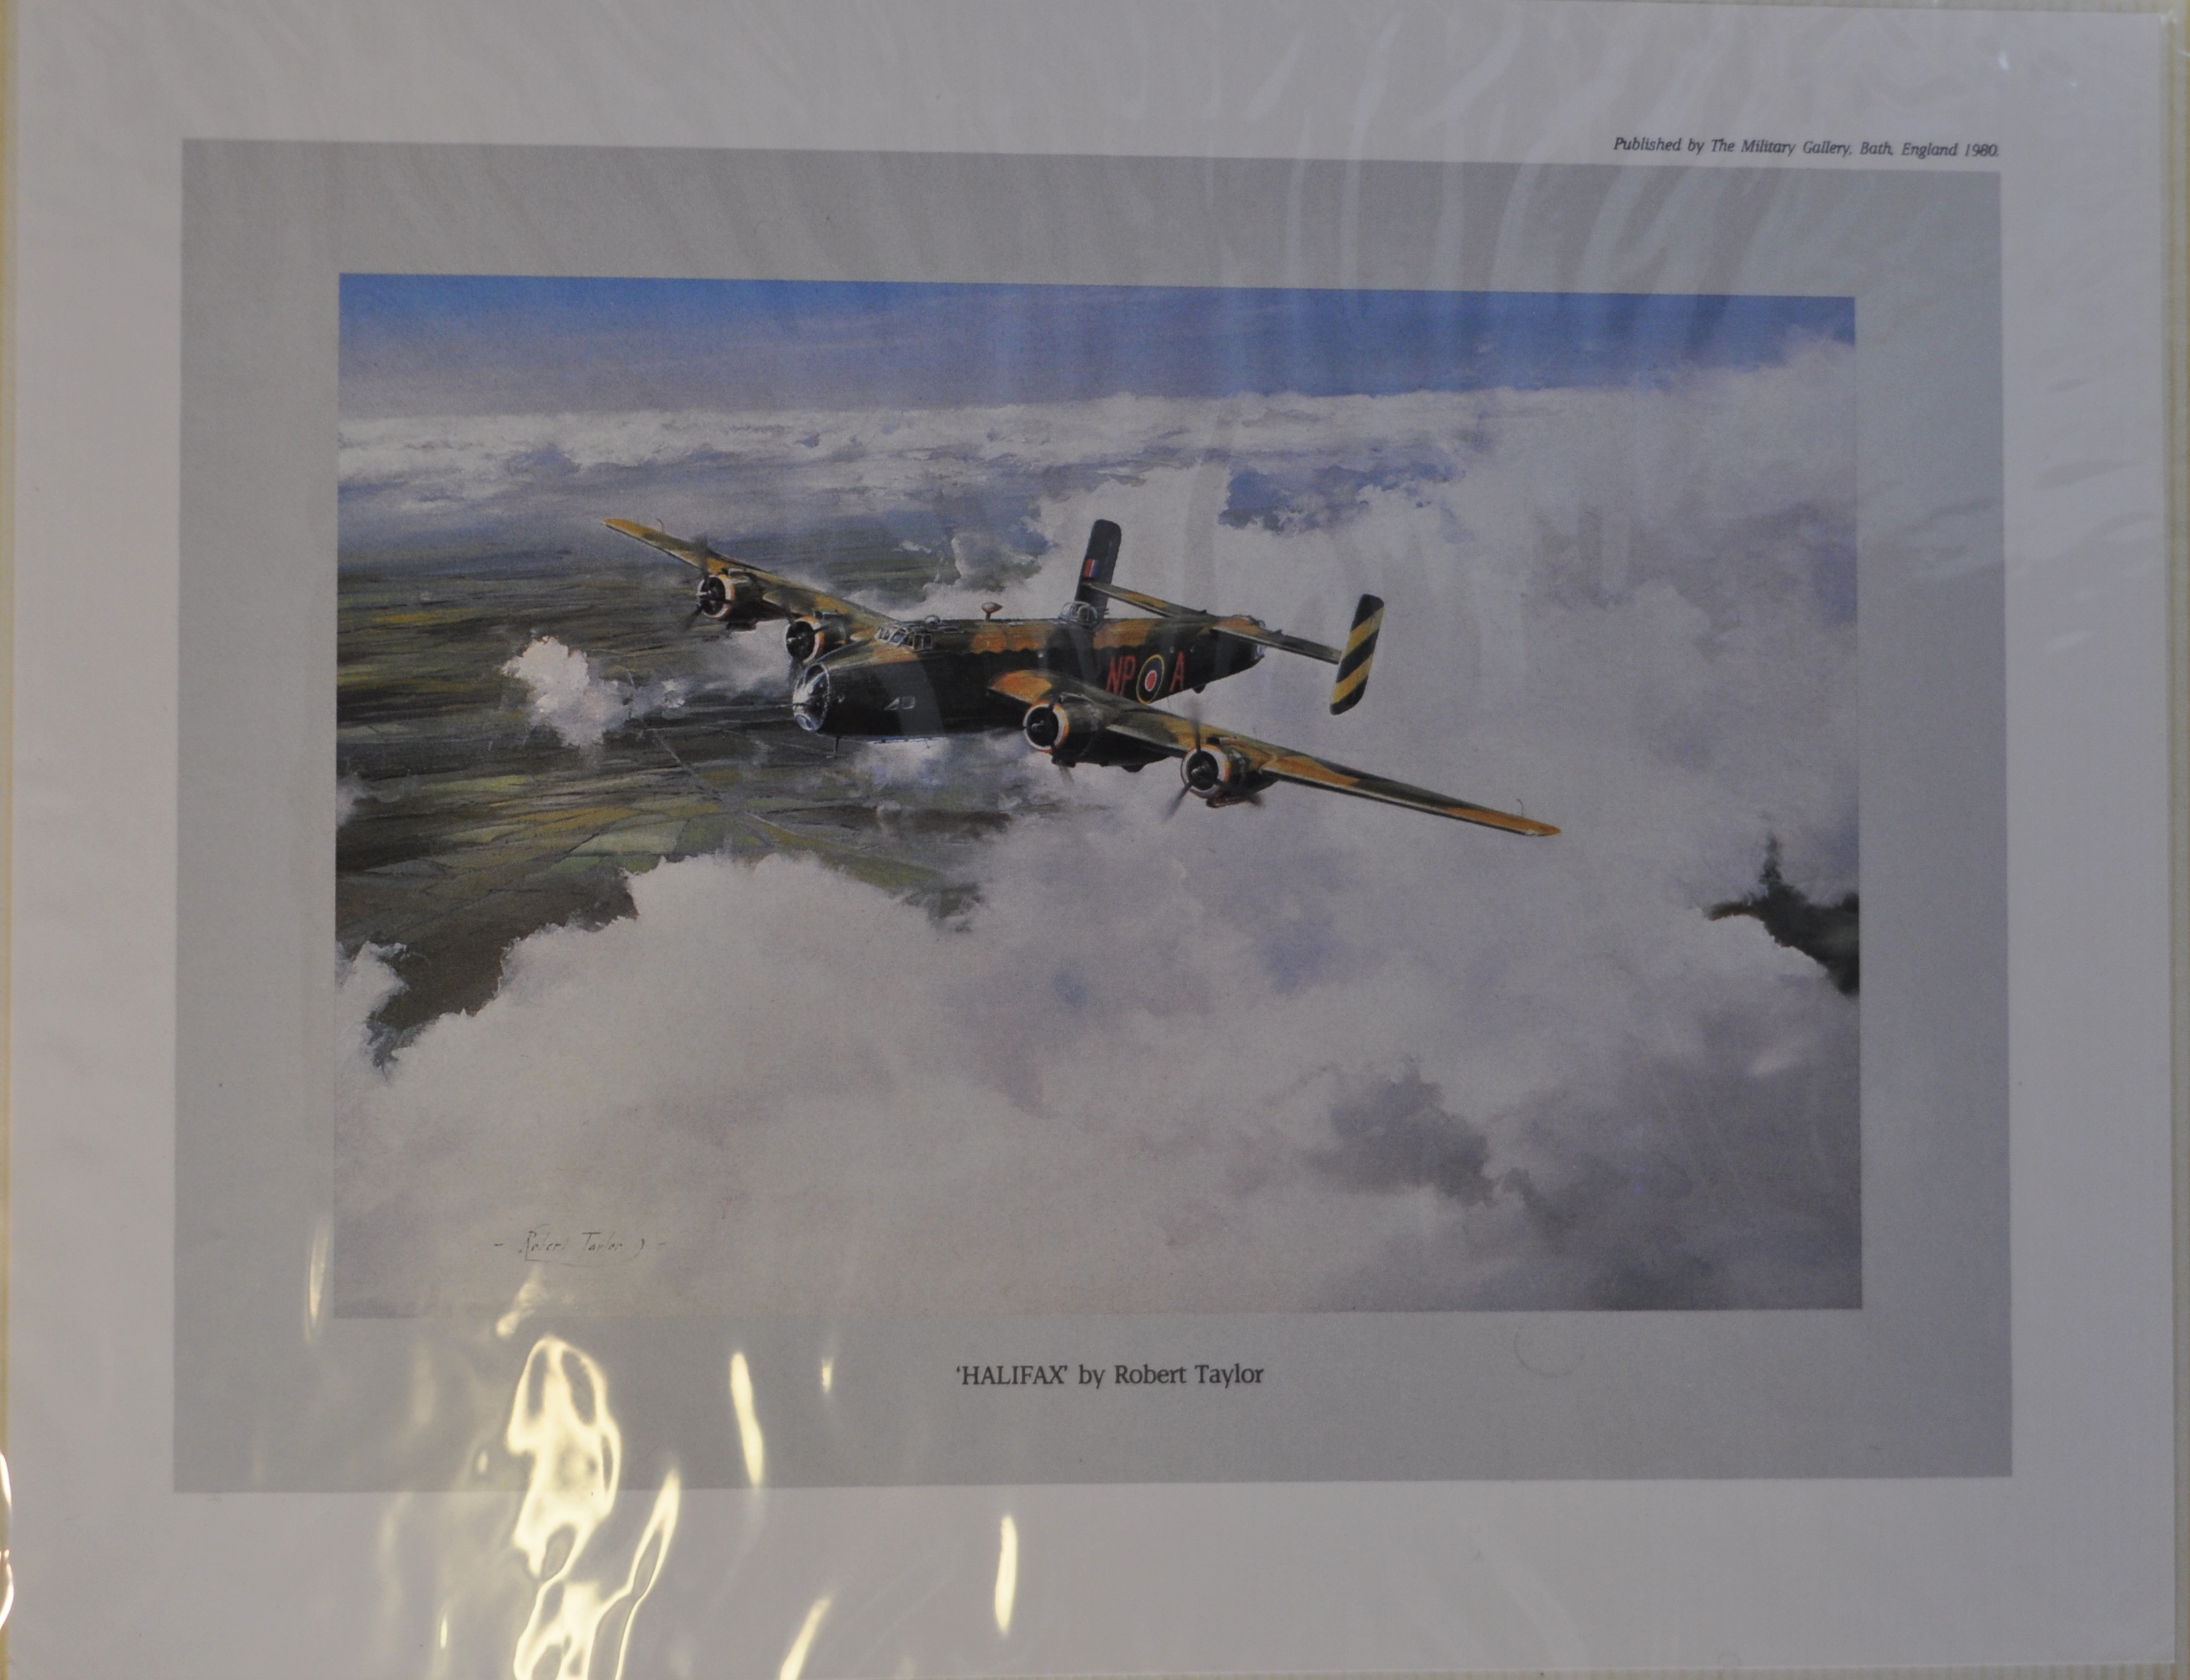 RAF WW2 BOMBER COMMAND AIRCREW HAND SIGNED PROFILE COLLECTION - MOUNTED IN ITS OWN PRESENTATION - Image 3 of 7